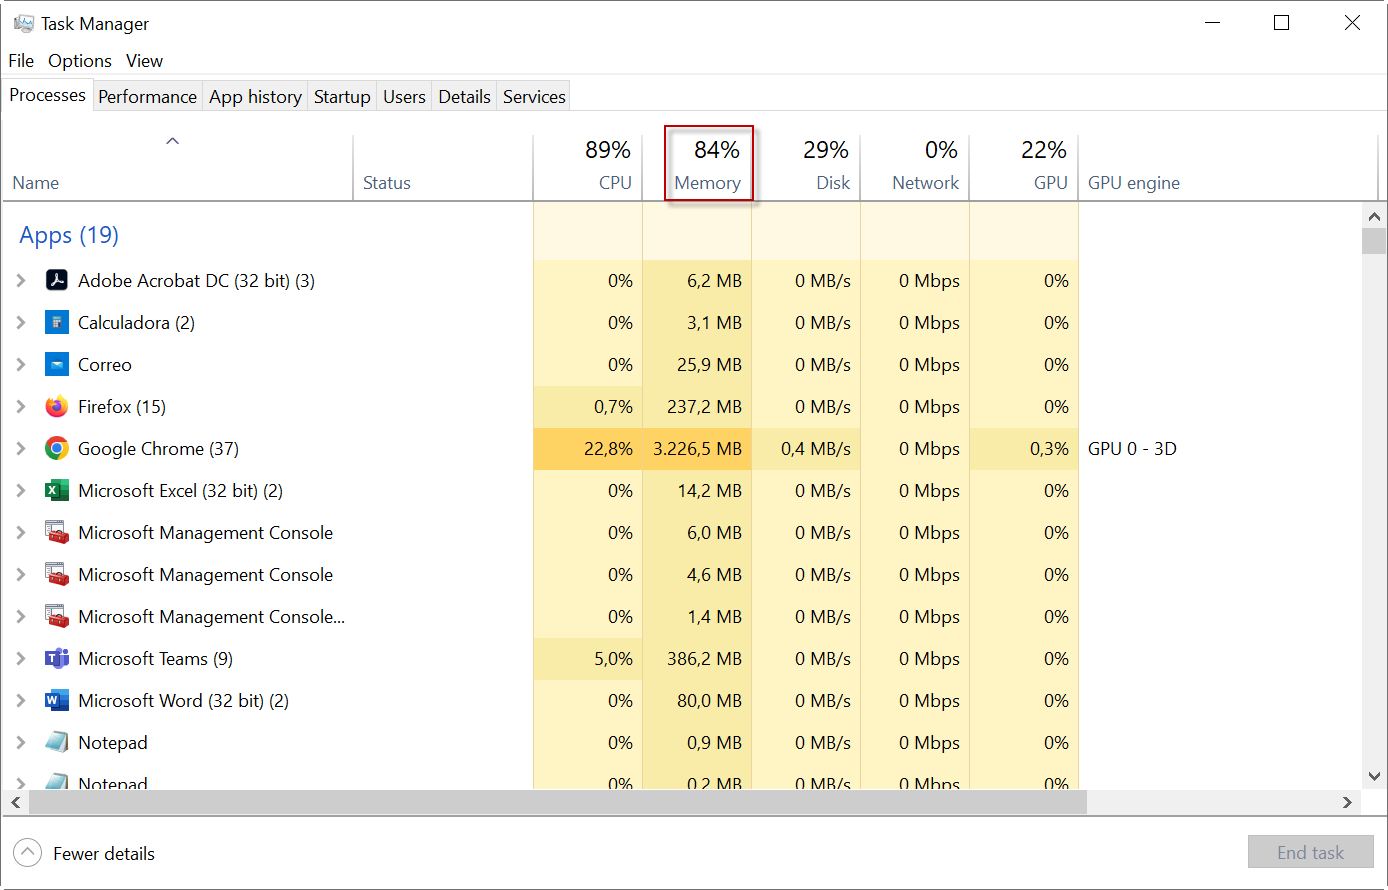 Image of Task Manager